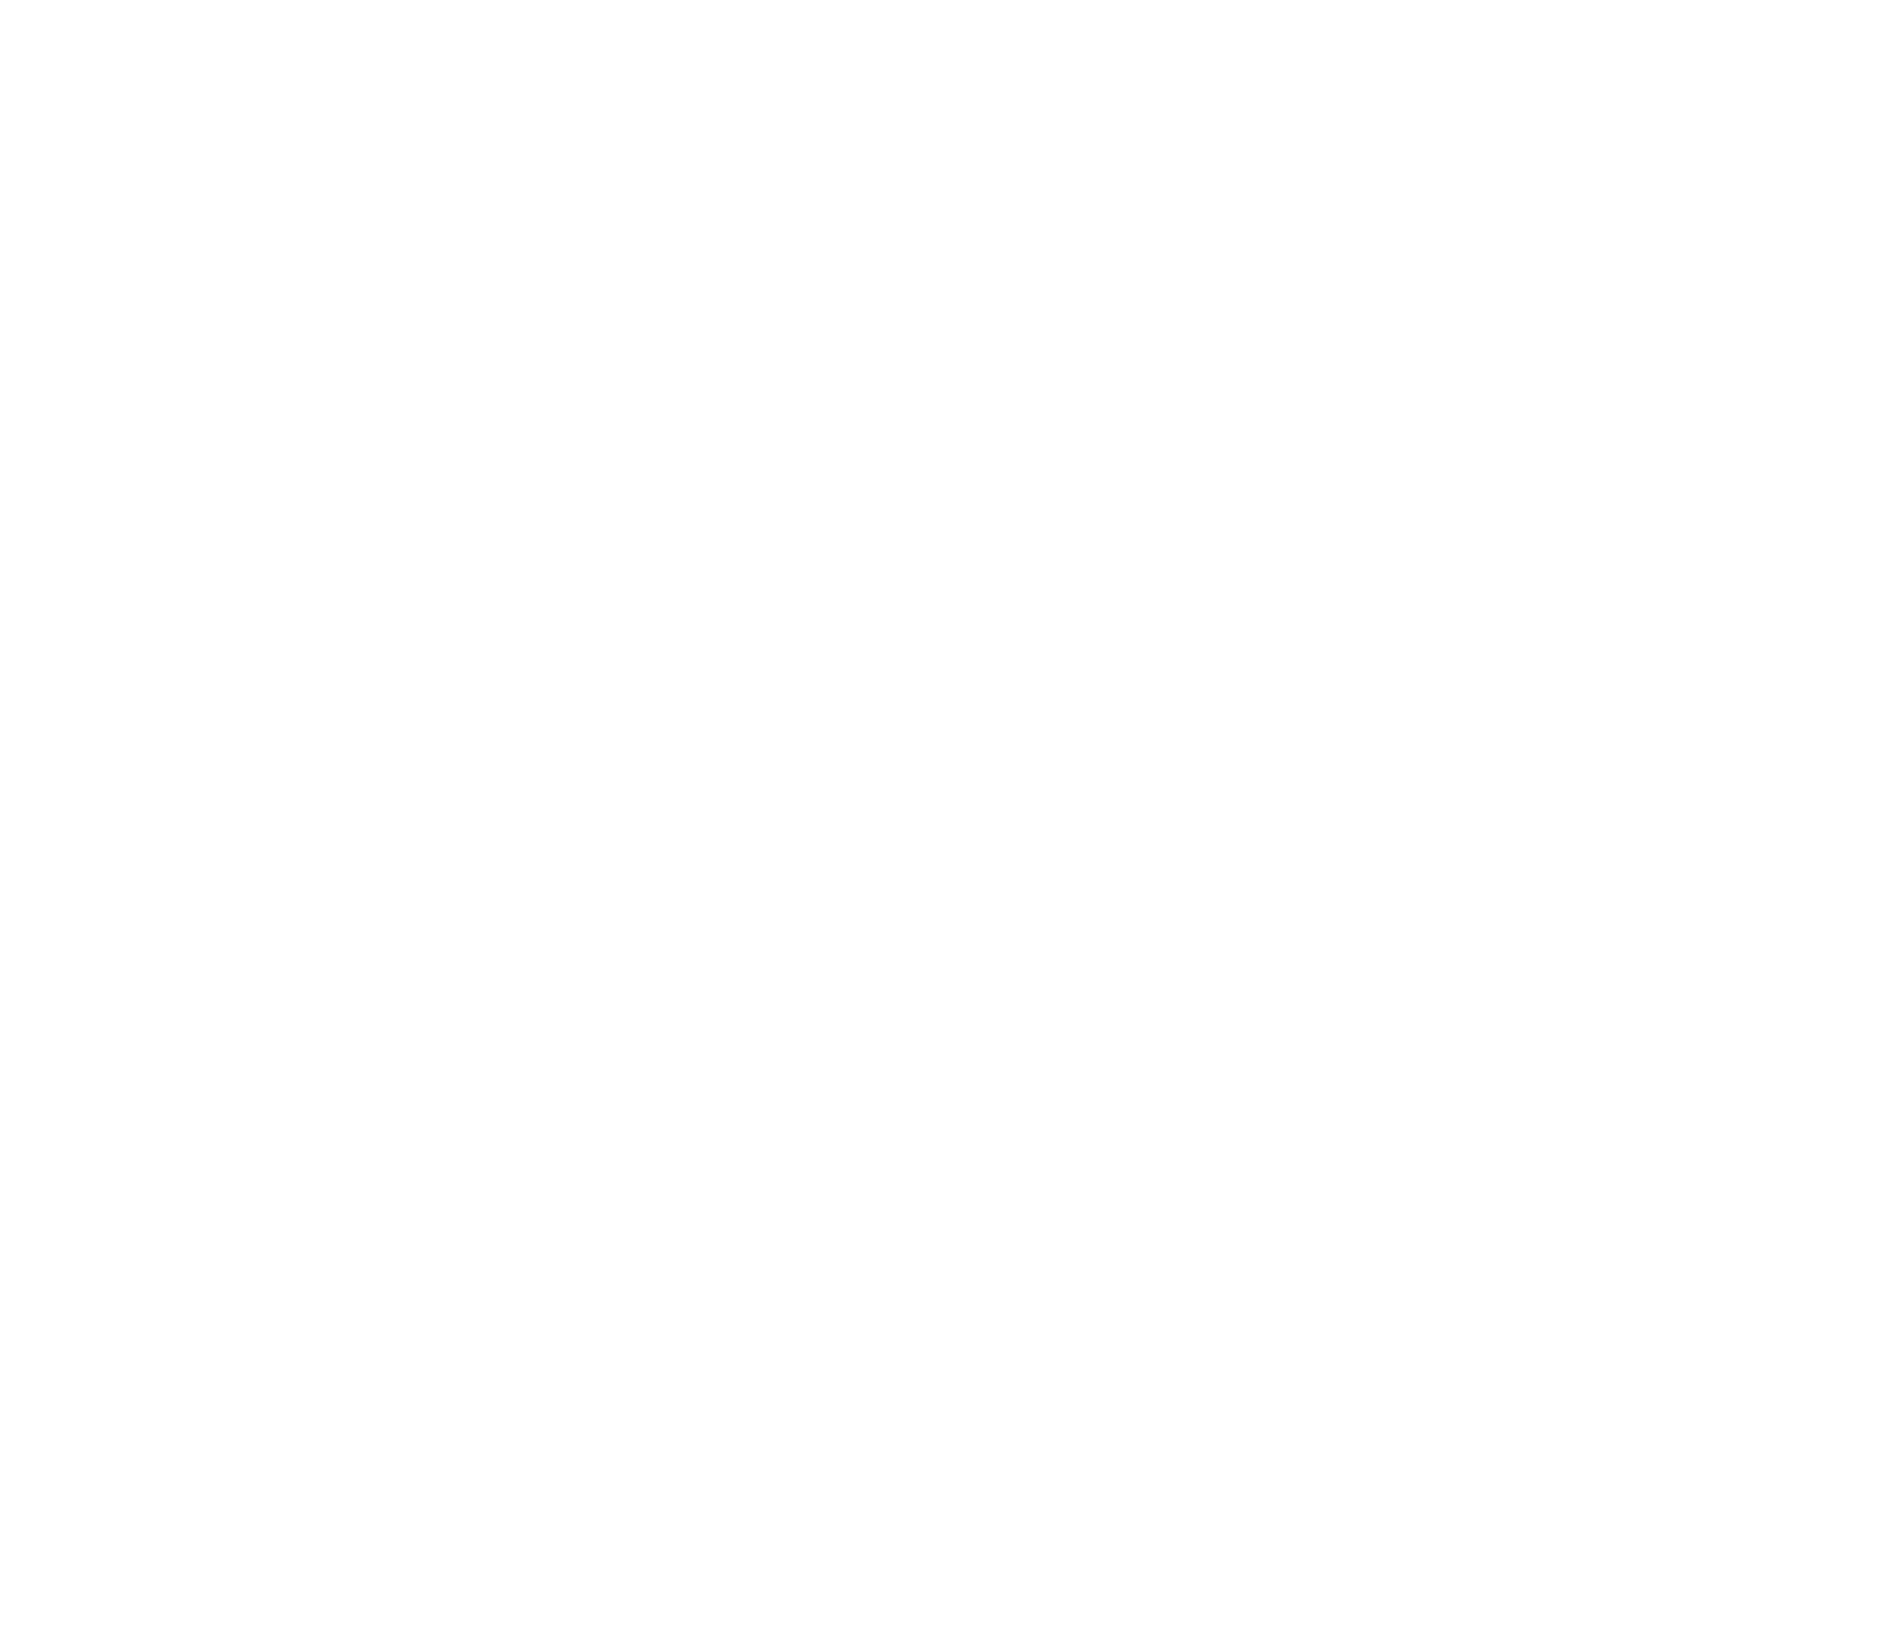 Advanced Racking Systems